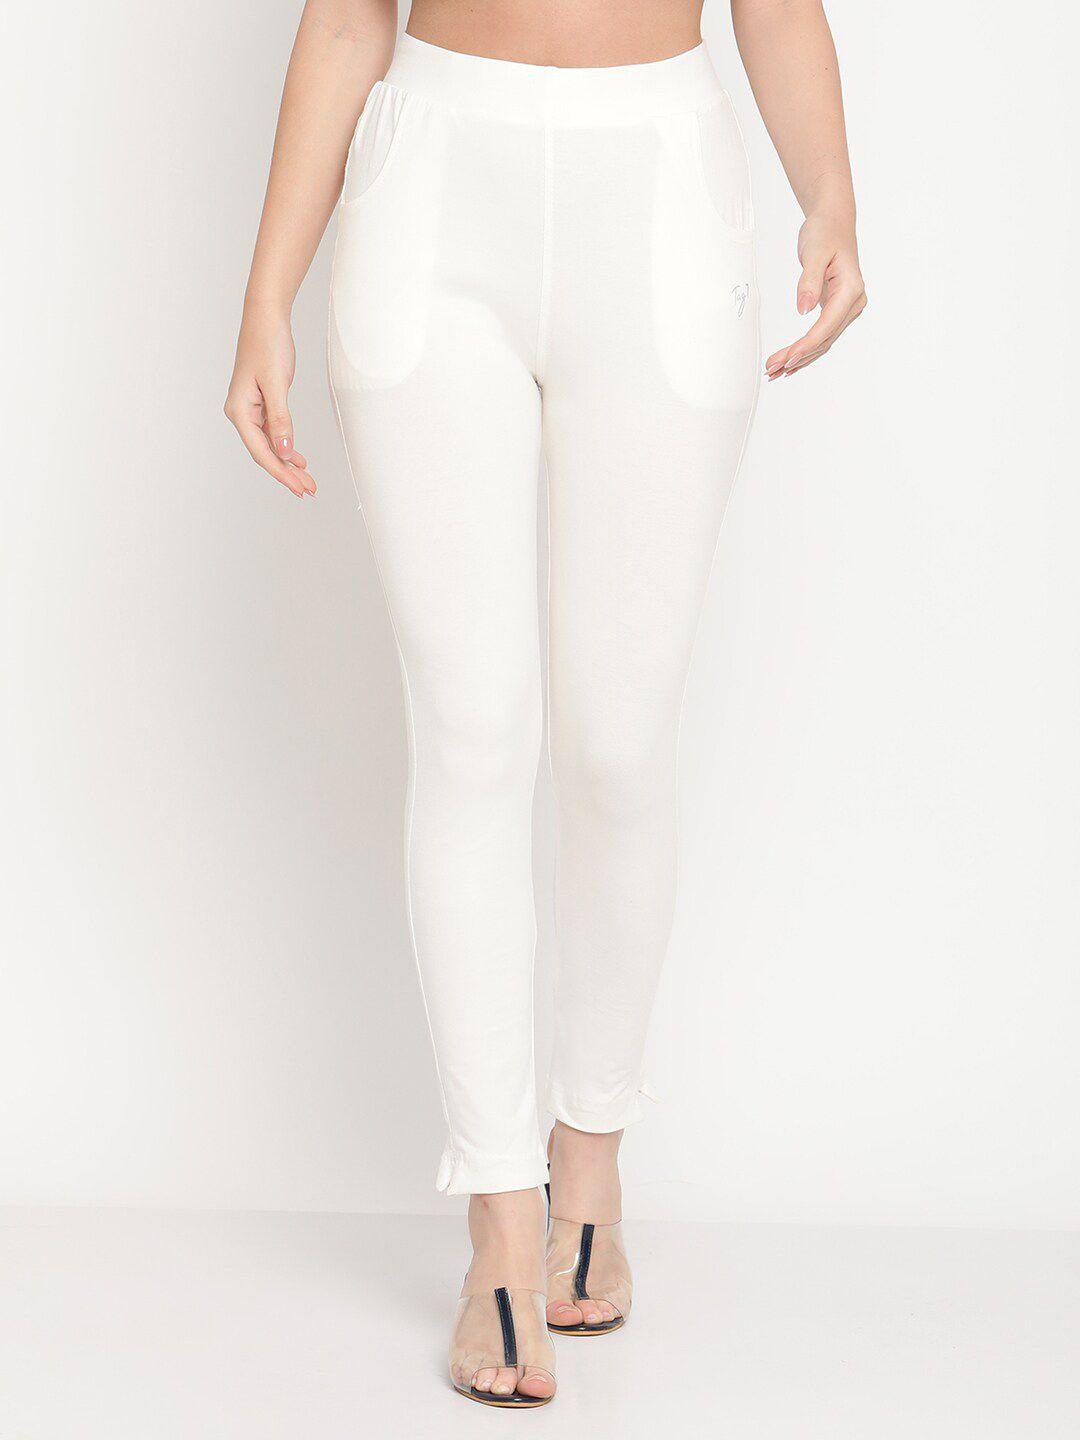 tag 7 women off white solid ankle length jeggings